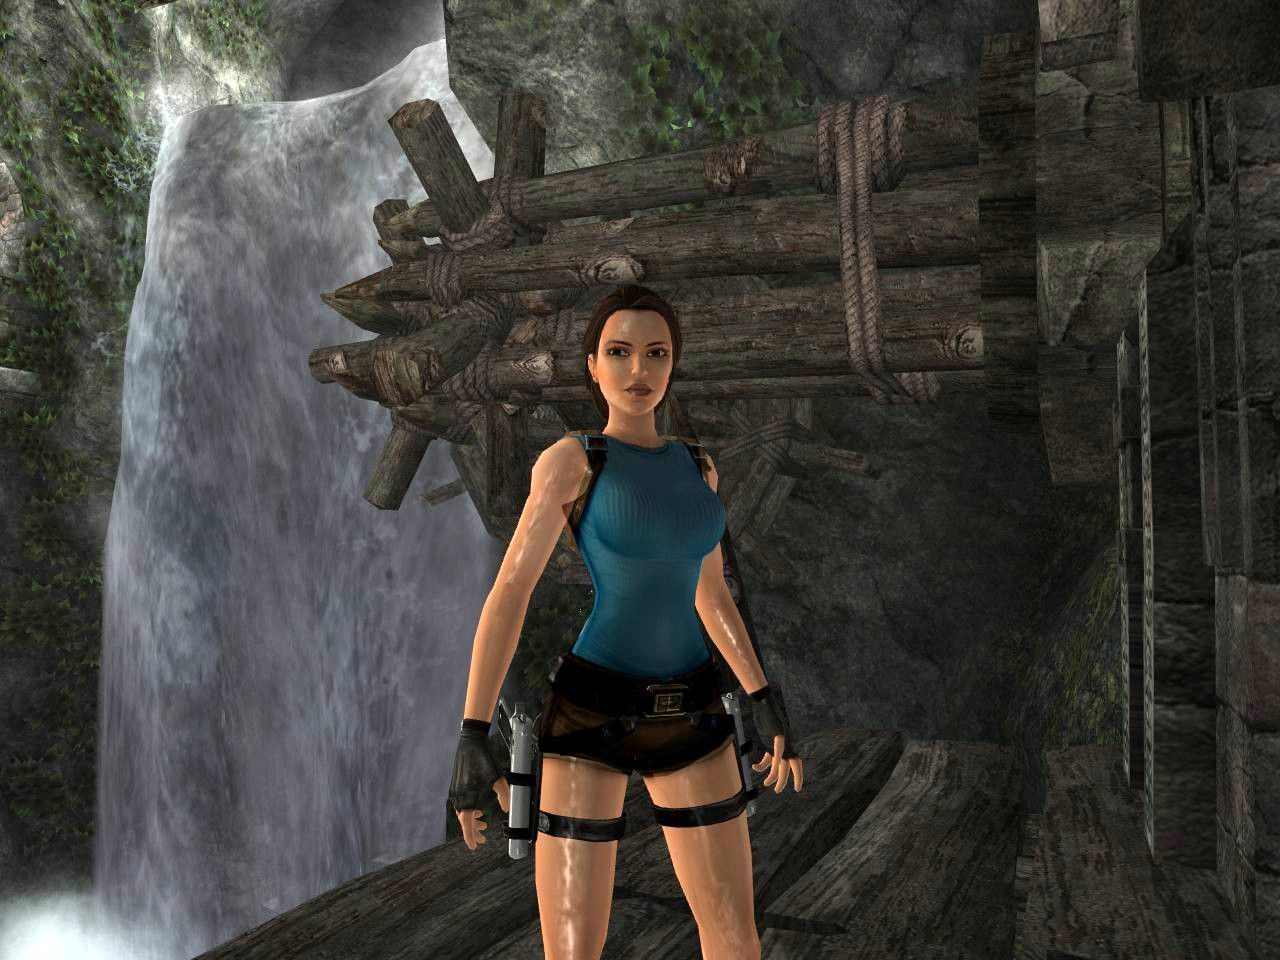 of the tomb raider download free